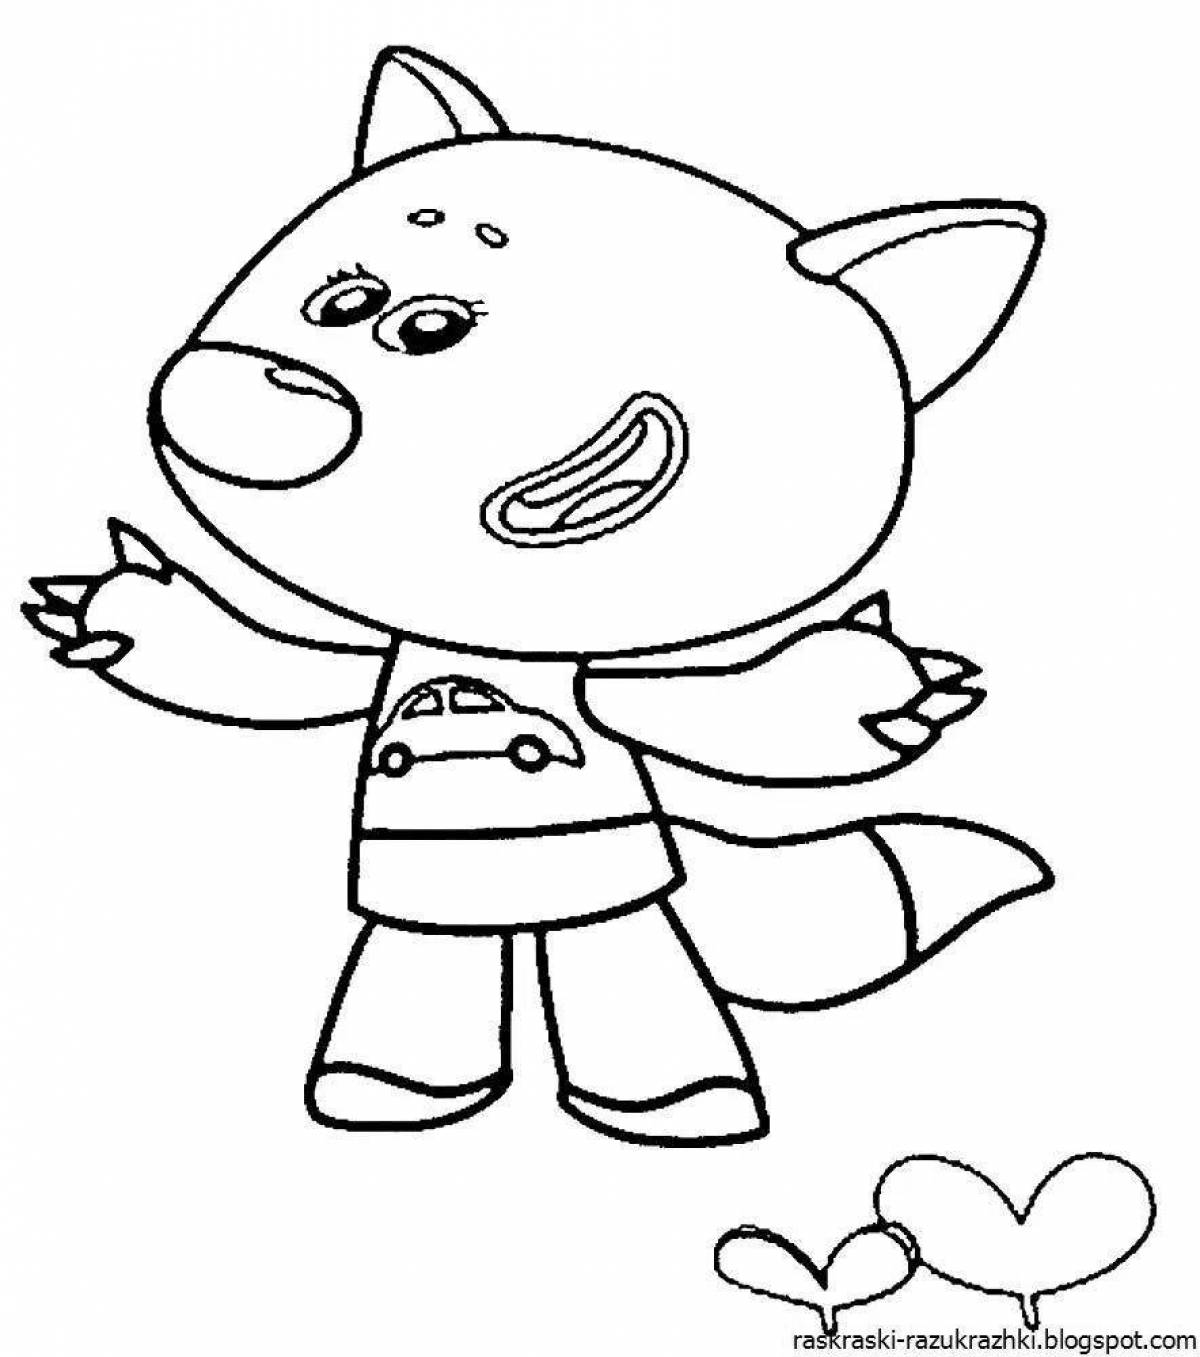 Adorable teddy bear coloring pages for kids